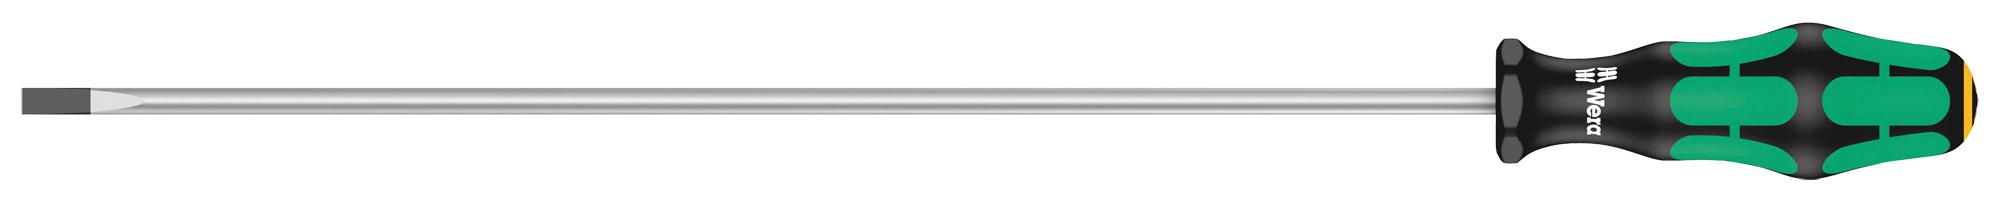 05008060001 SLOTTED SCREWDRIVER, TIP 5.5MM, 300MM WERA